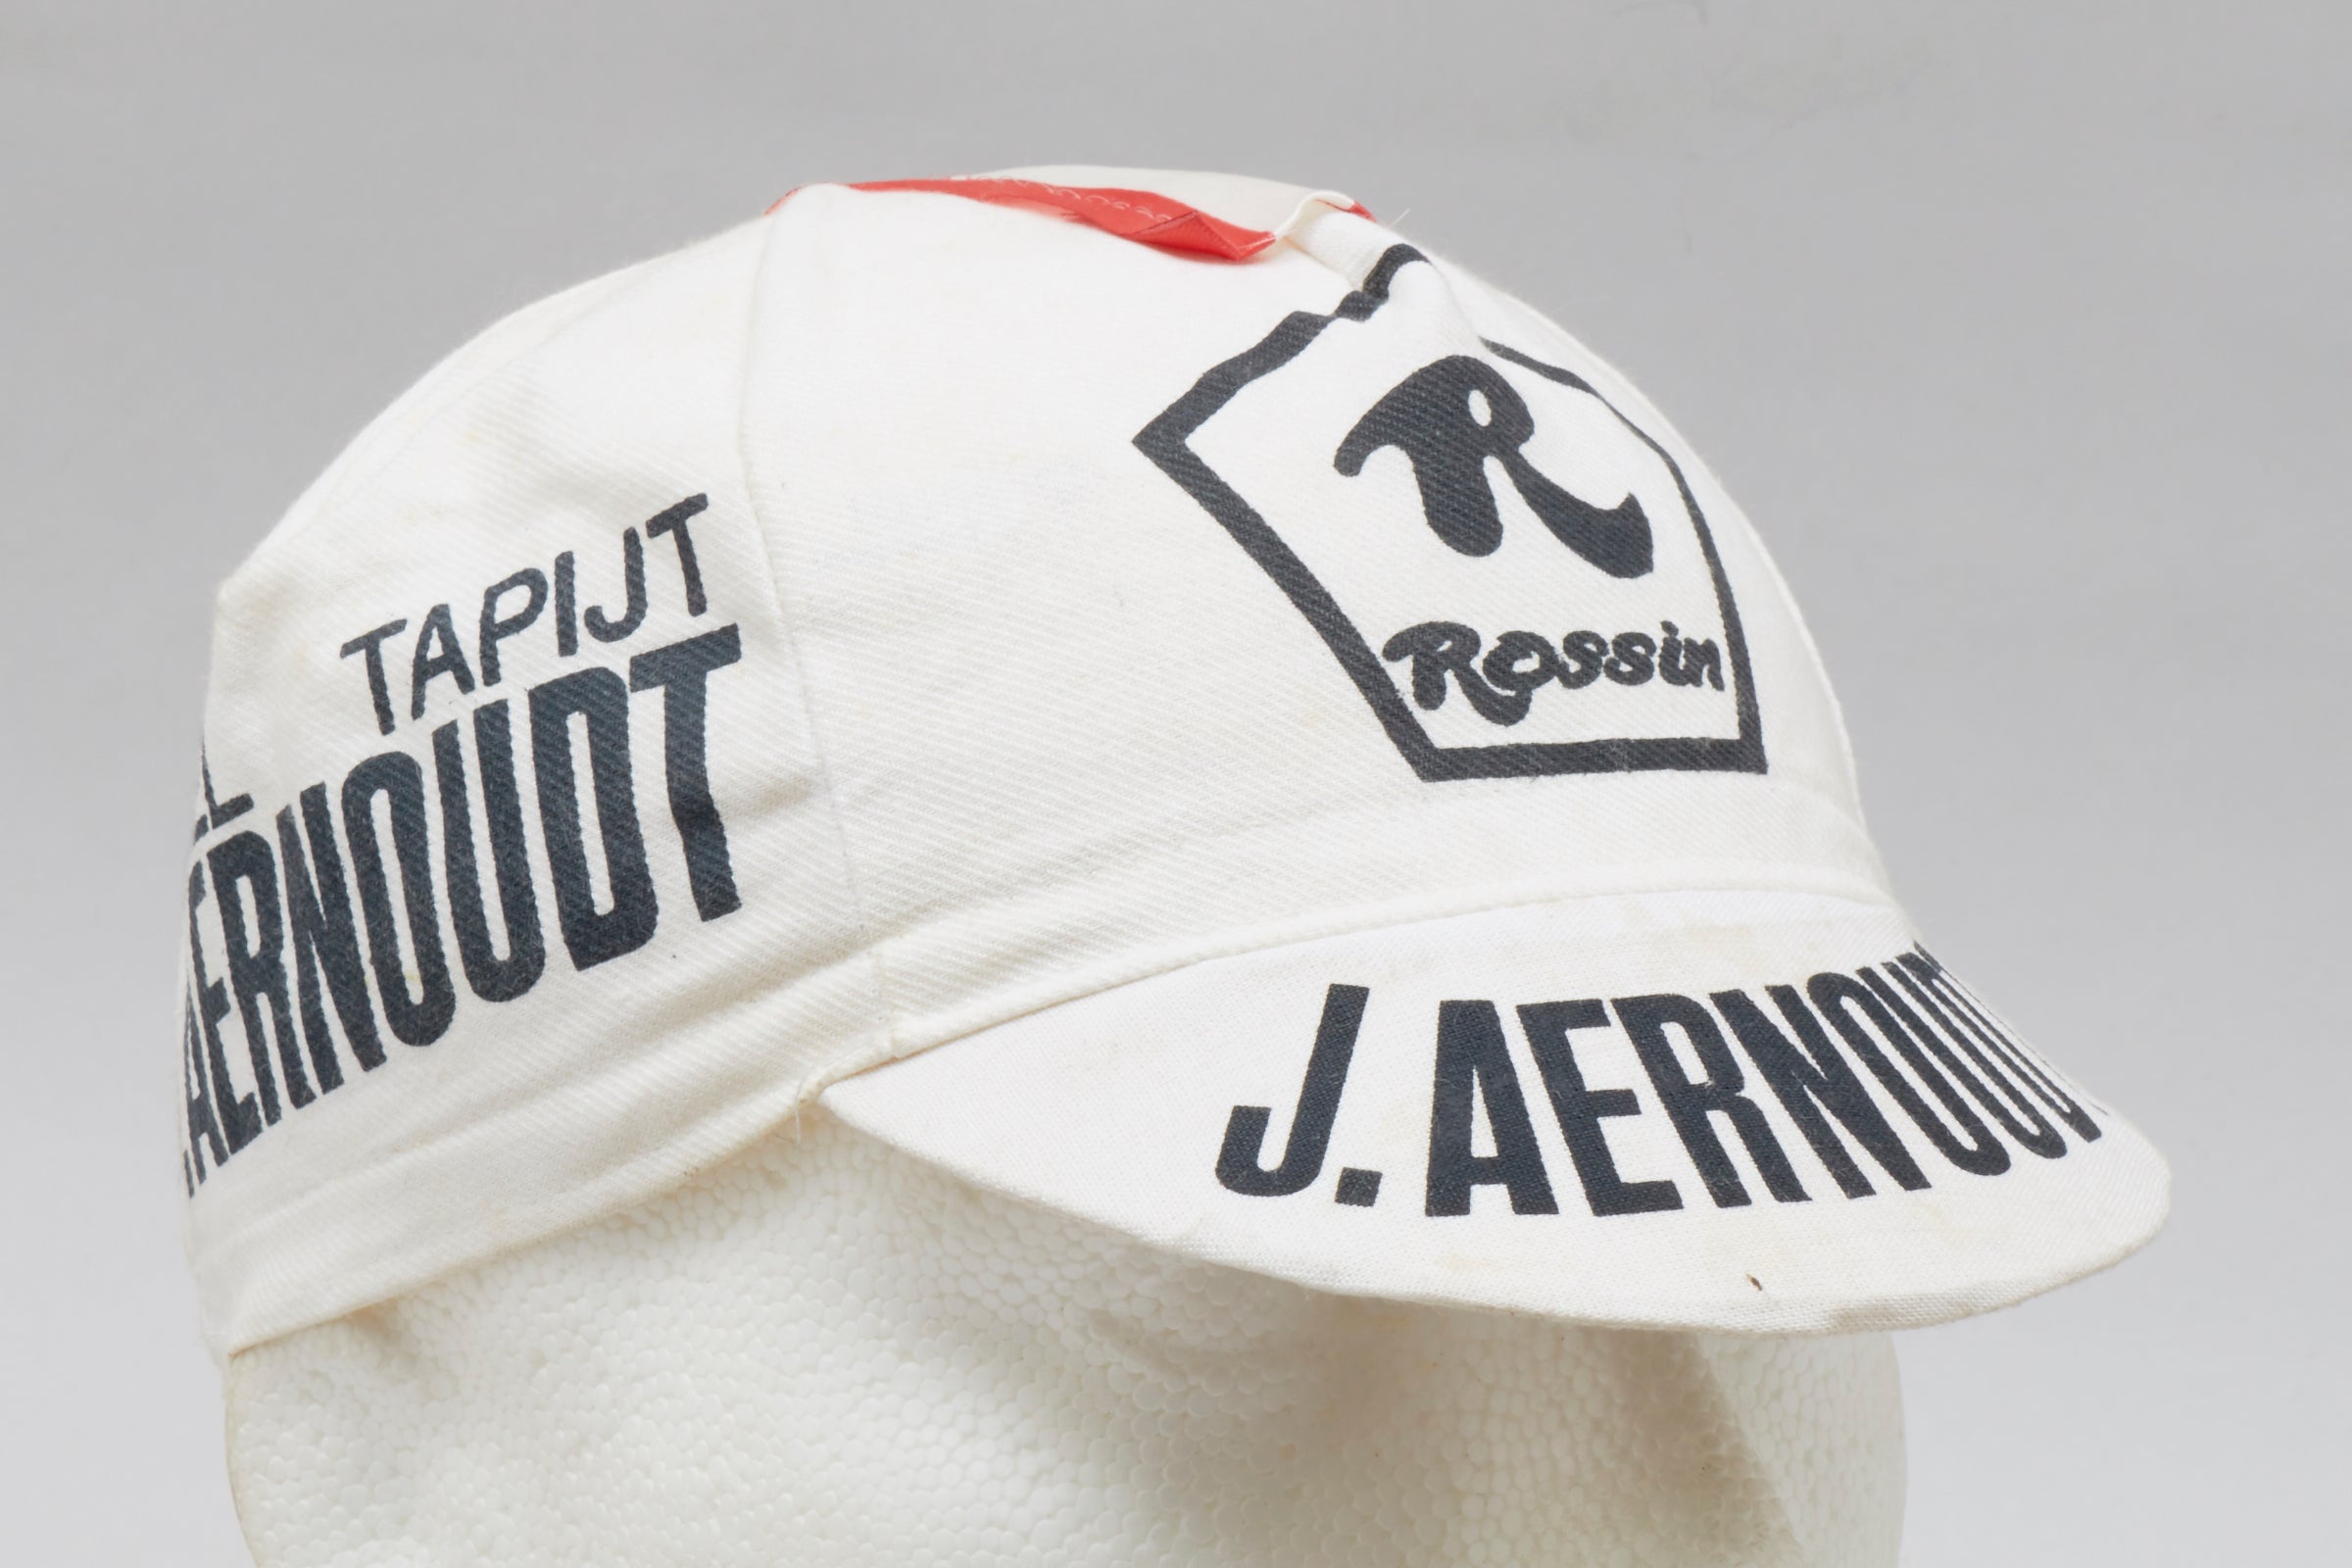 Jacky Aernoudt - Meubelen - Rossin c.1983 NOS Vintage Italian Cotton Cycling Cap - Pedal Pedlar - Buy New Old Stock Clothing